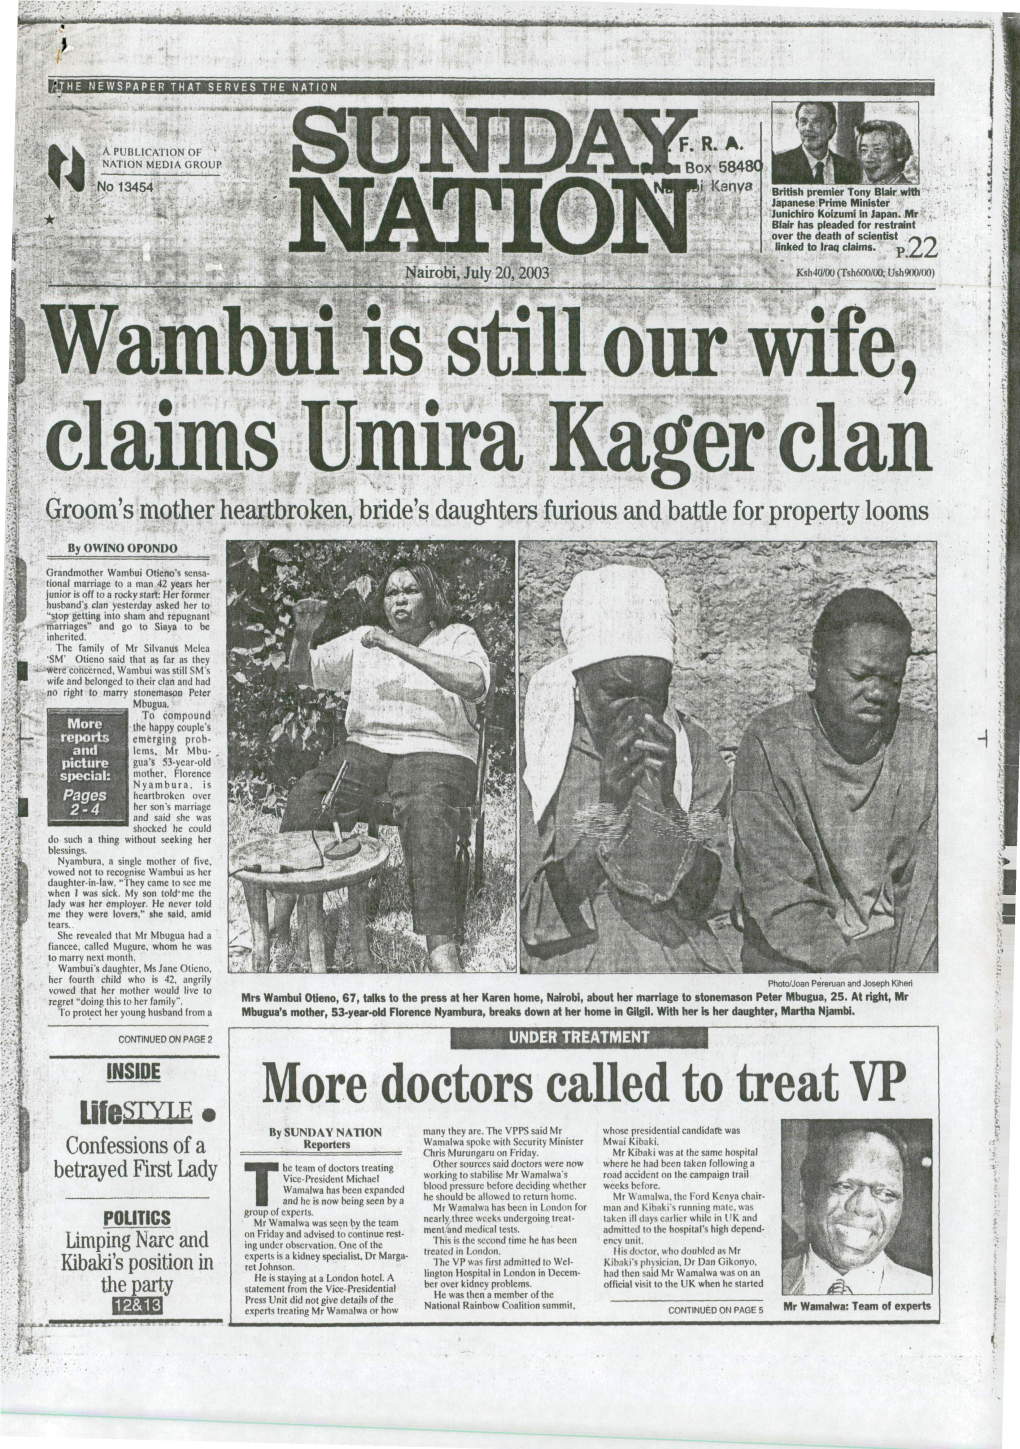 J' Wambui Is Still Our Vife, Claims Umira Kager Clan Groom's Mother Heartbroken, Bride's Daughters Furious and Battle for Property Looms